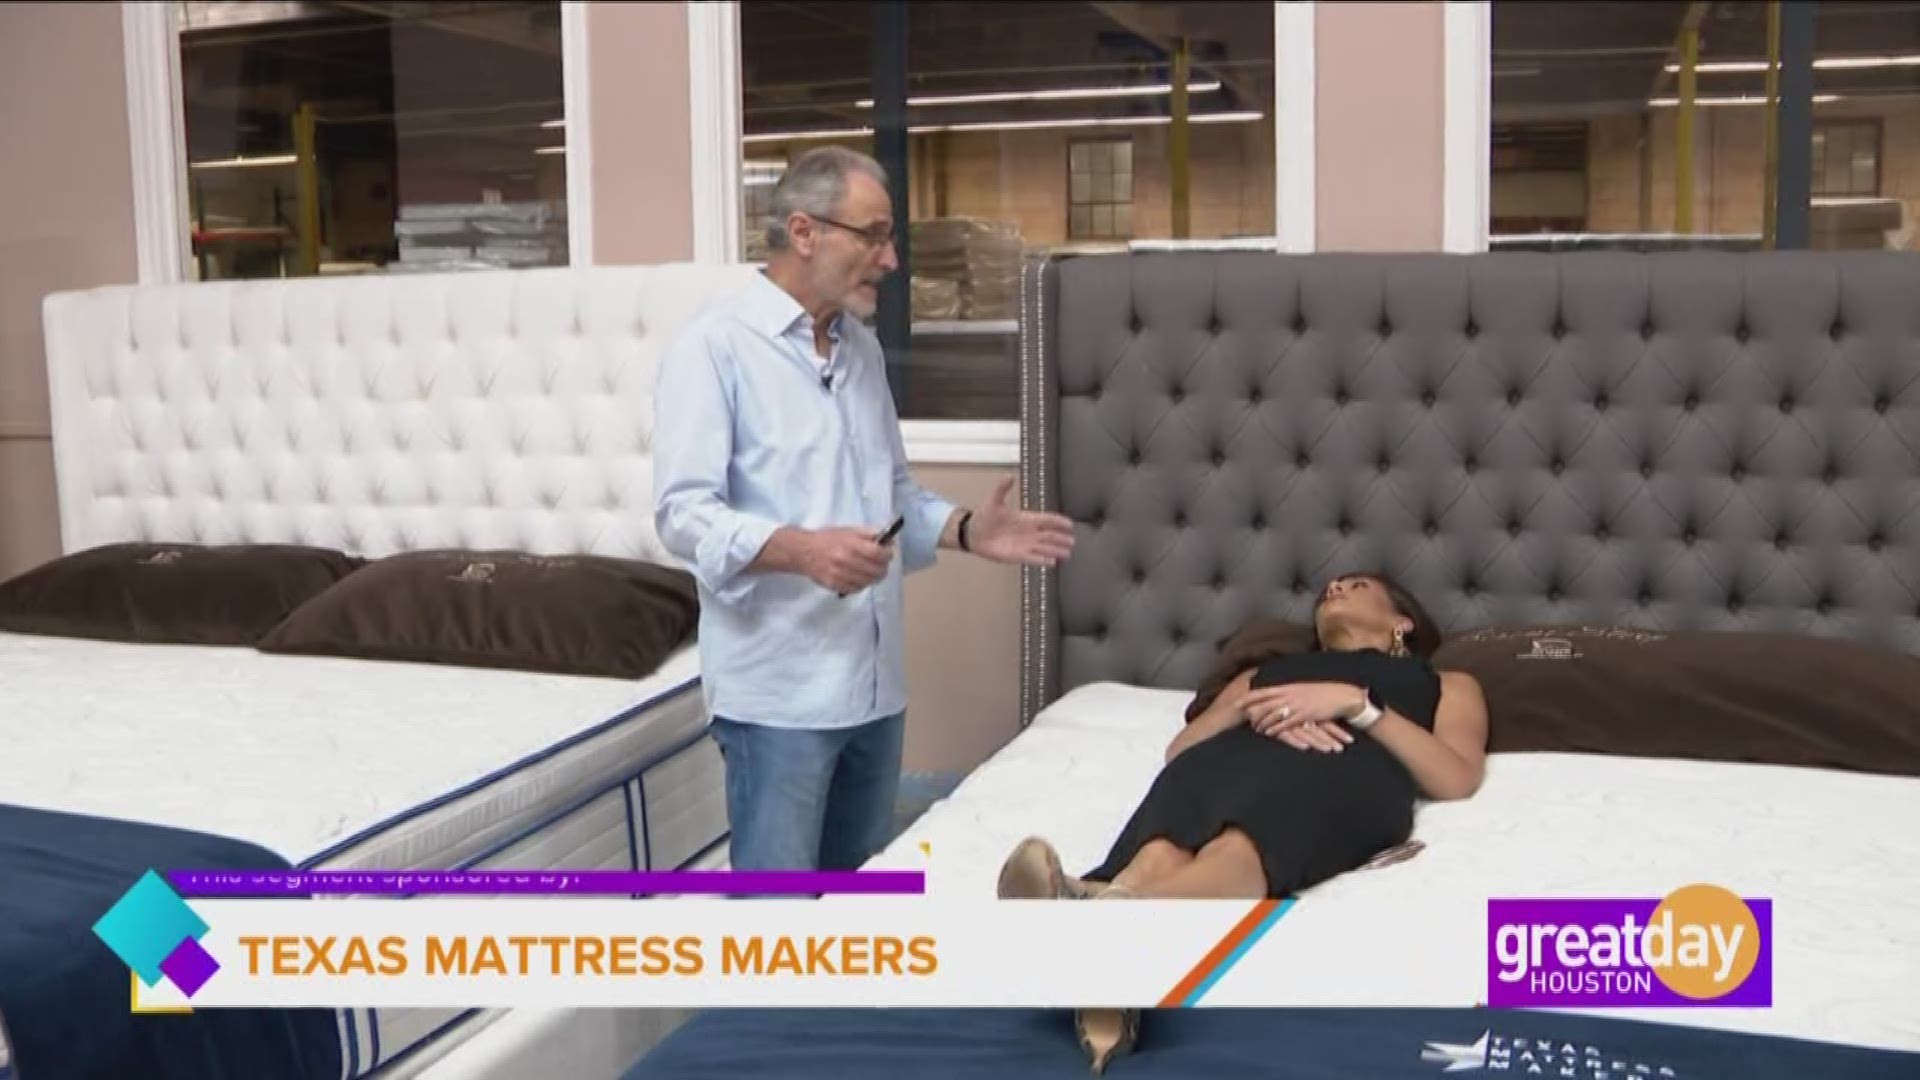 President of Texas Mattress Makers Youval Meicler explains what you should know before buying an adjustable bed.